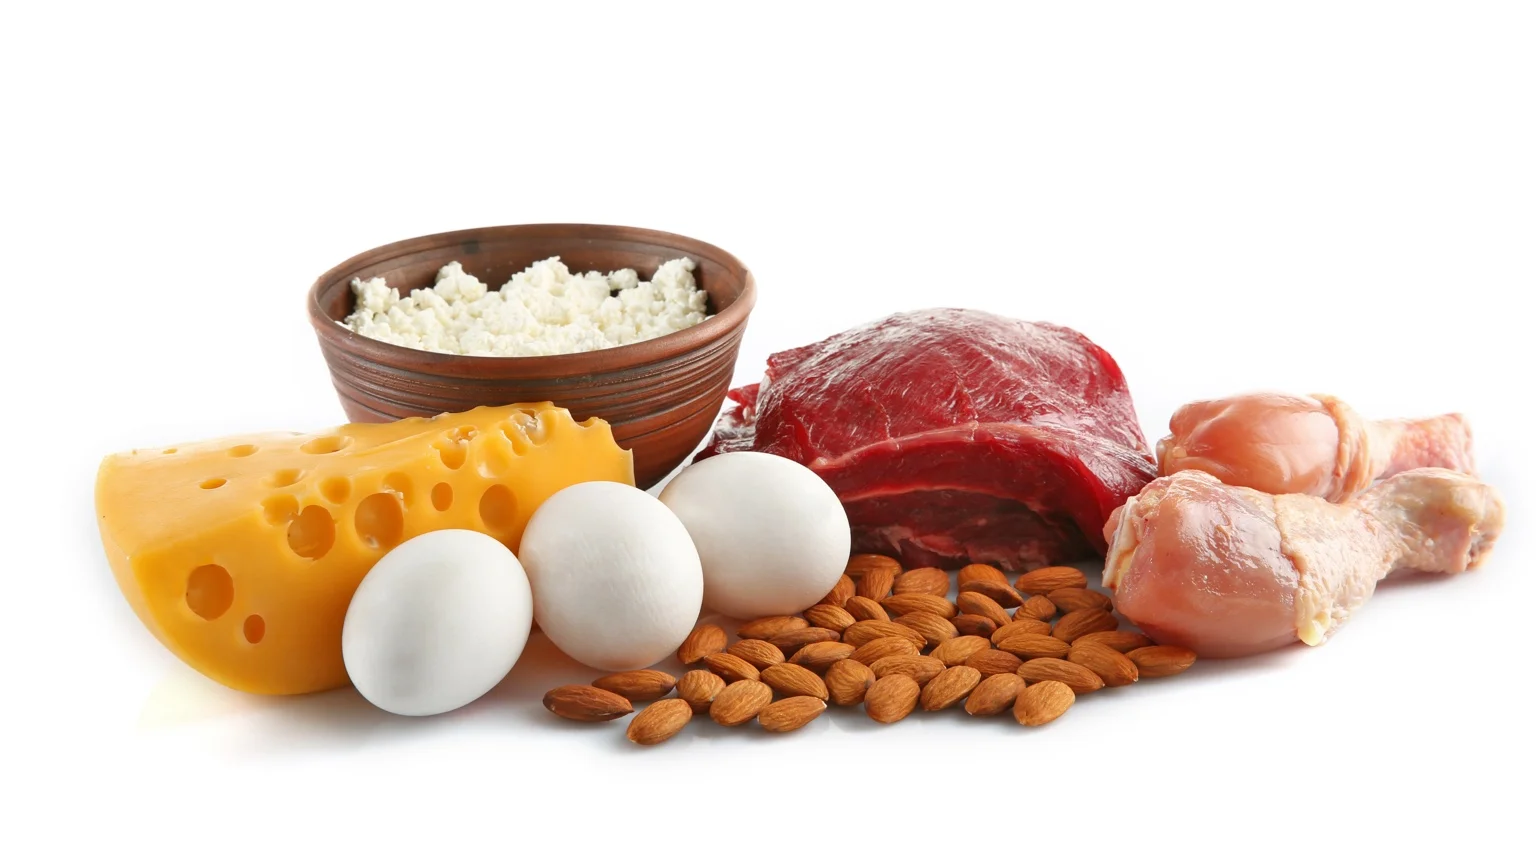 Foods high in protein, including meats, eggs and almonds.